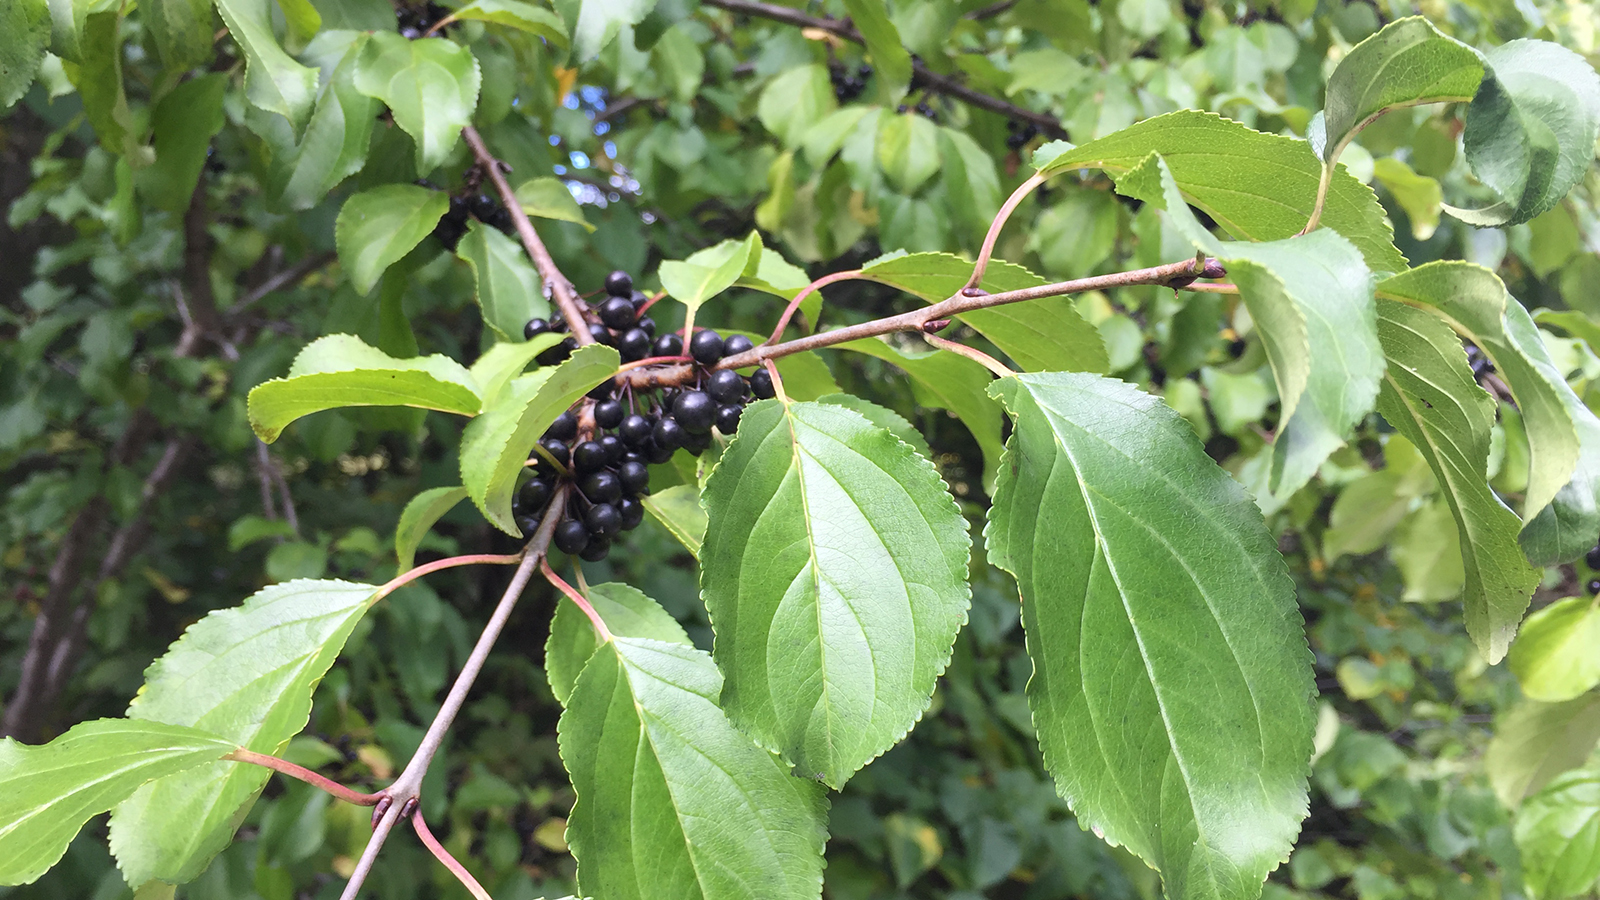 Buckthorn has smooth green leaves with fine toothed edges, older stems end with a sharp thorn, and it produces a dark berry-like fruit.